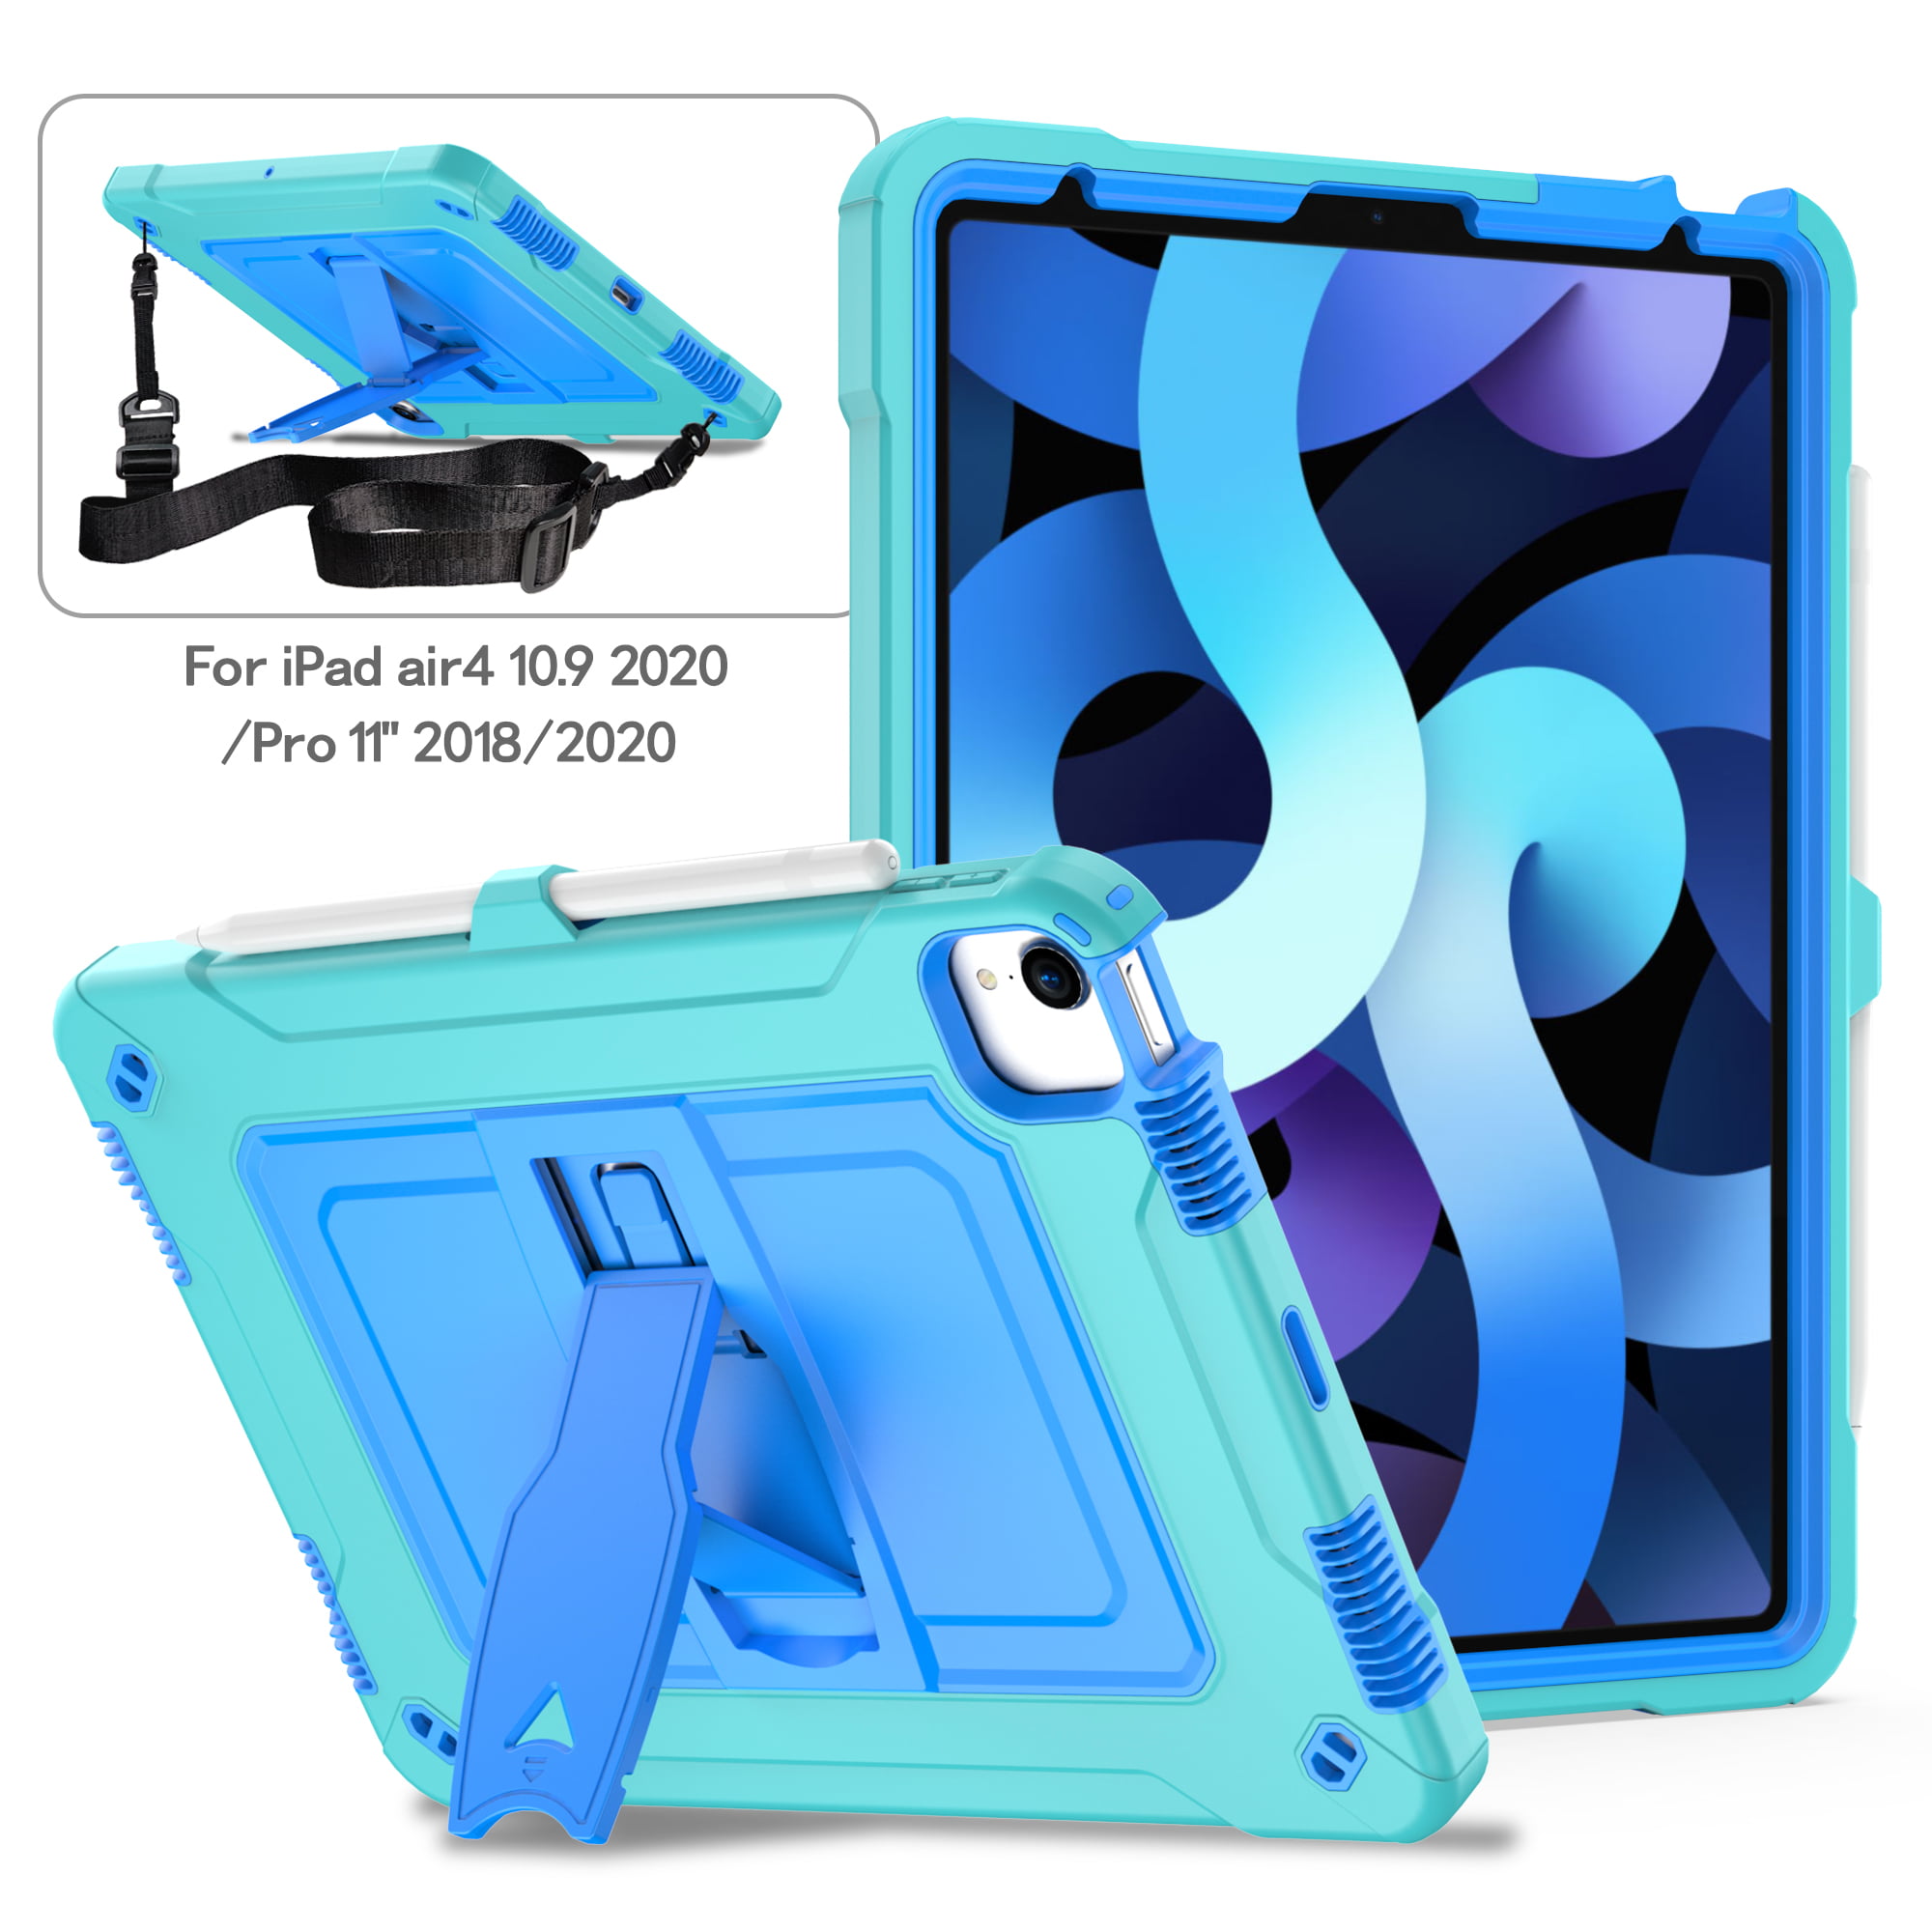 iPad Air 4 10.9 Case 2020, iPad Pro 11 Inch 2020 2018 Case, Heavy Duty  Hybrid Shockproof Stand Anti Scratch Kids Cover Drop-Proof Protection Case  with Hand Shoulder Strap Case,Aqua & Blue 